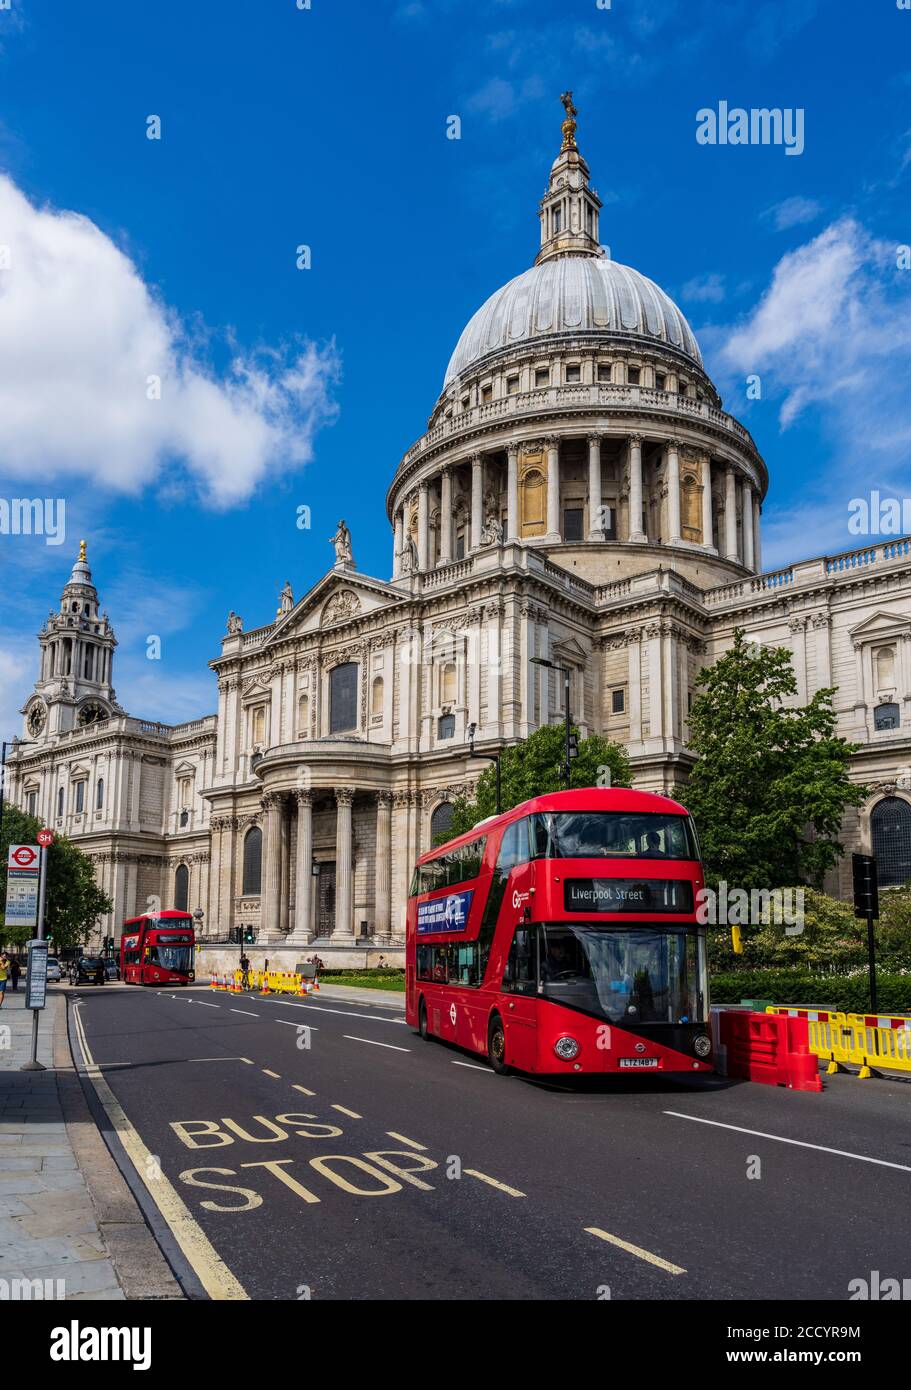 St Paul's Cathedral London - a London bus passes the iconic St Pauls Cathedral London UK - Architect Christopher Wren started 1675 consecrated 1697. Stock Photo